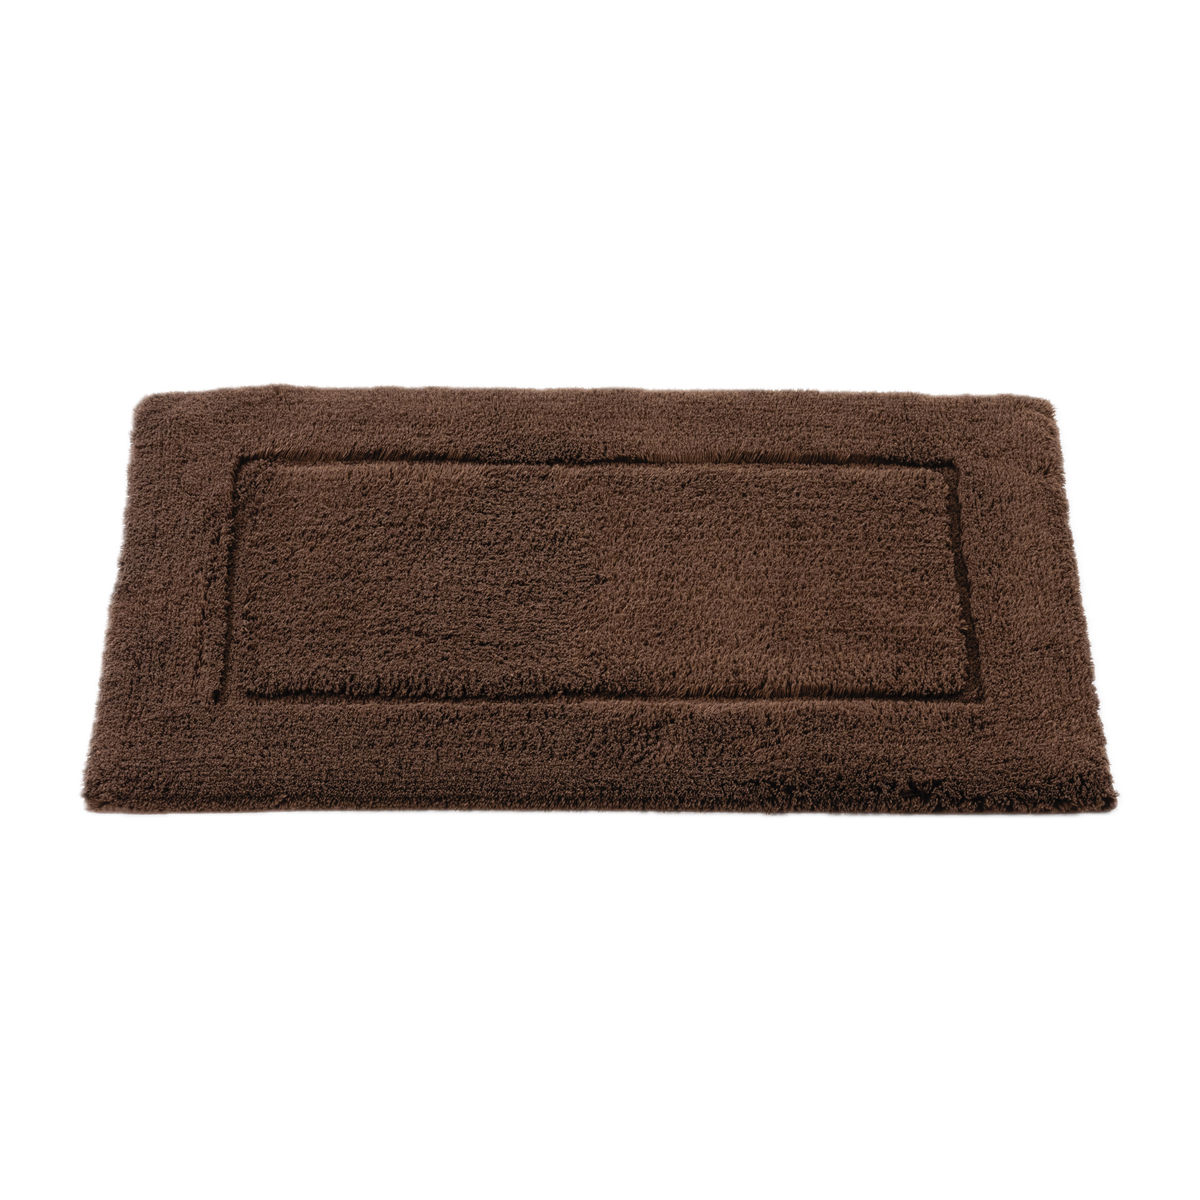 Tilted View of Abyss Habidecor Must Bath Rug in Mustang Color